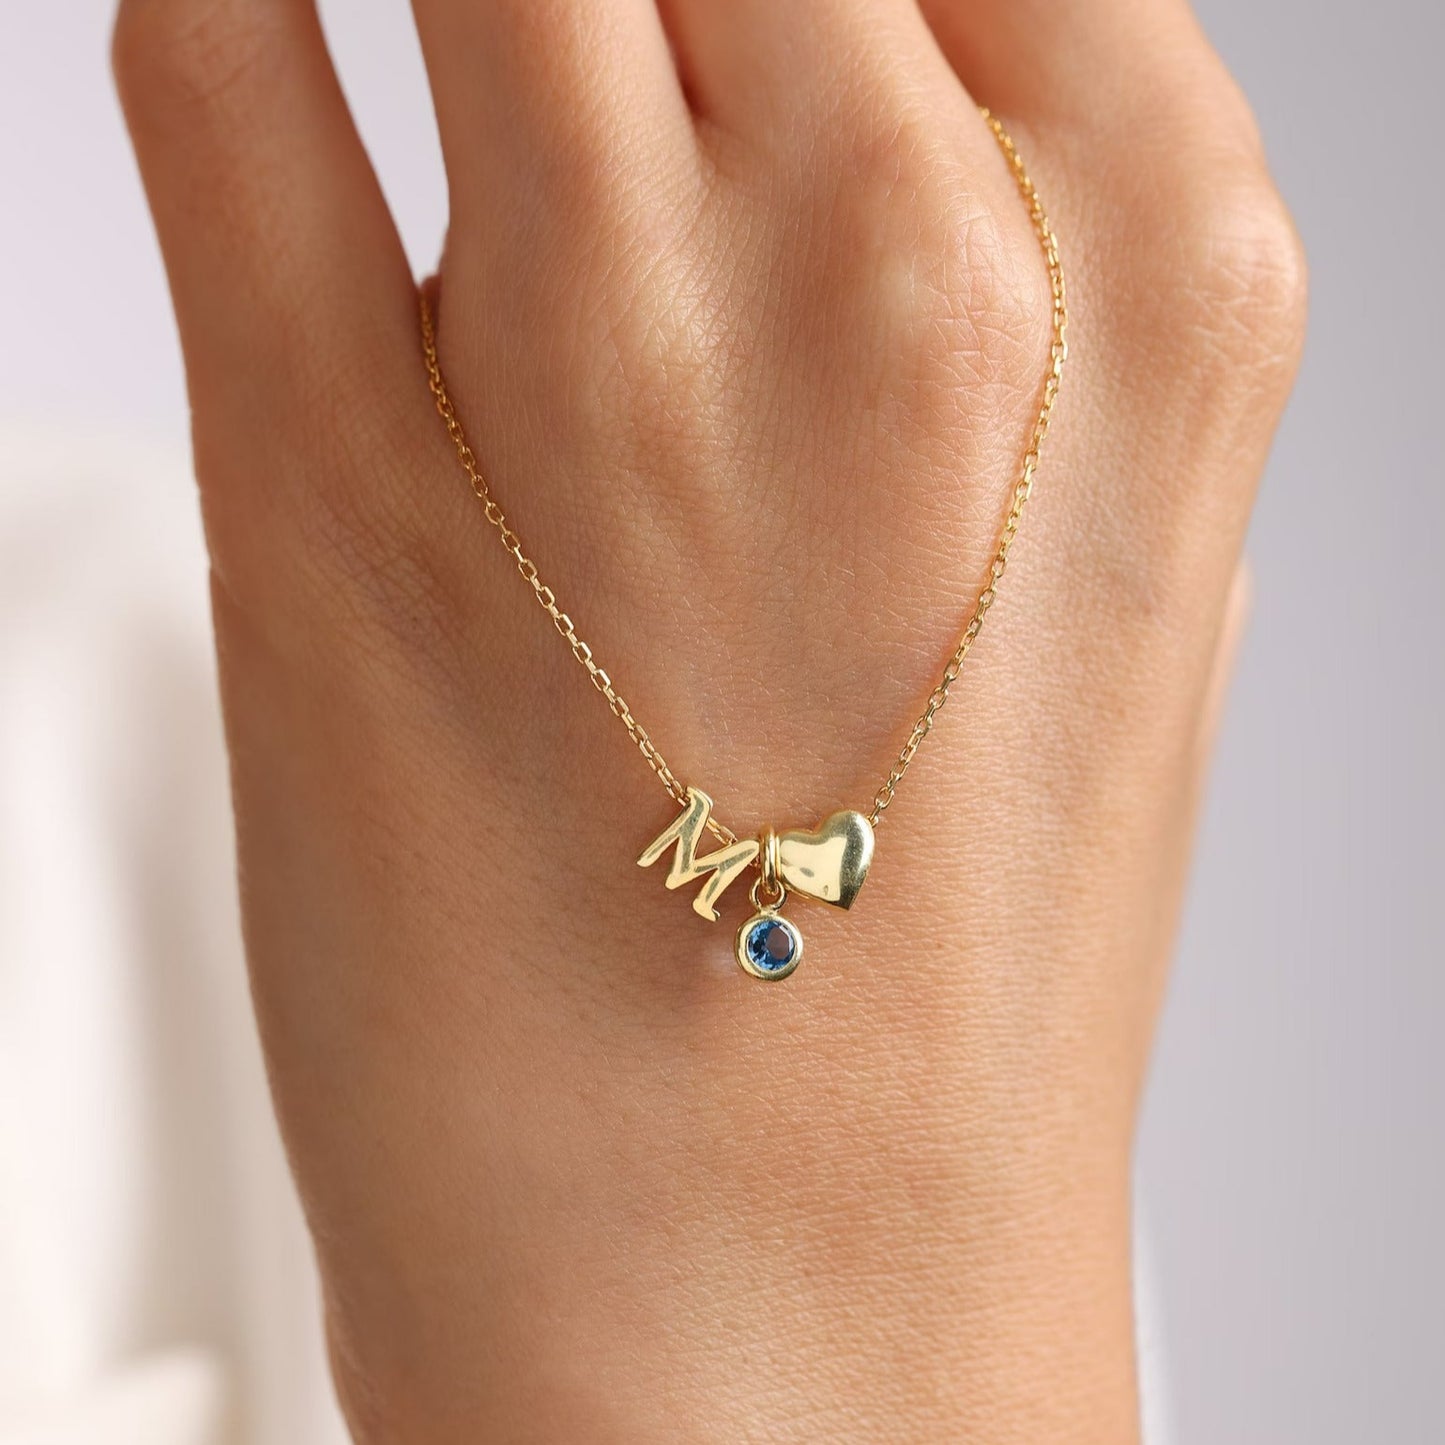 18 carat gold necklace for women - initial, heart and birthstone chain for her. Shop the finest birthday gifts for women in the UAE.